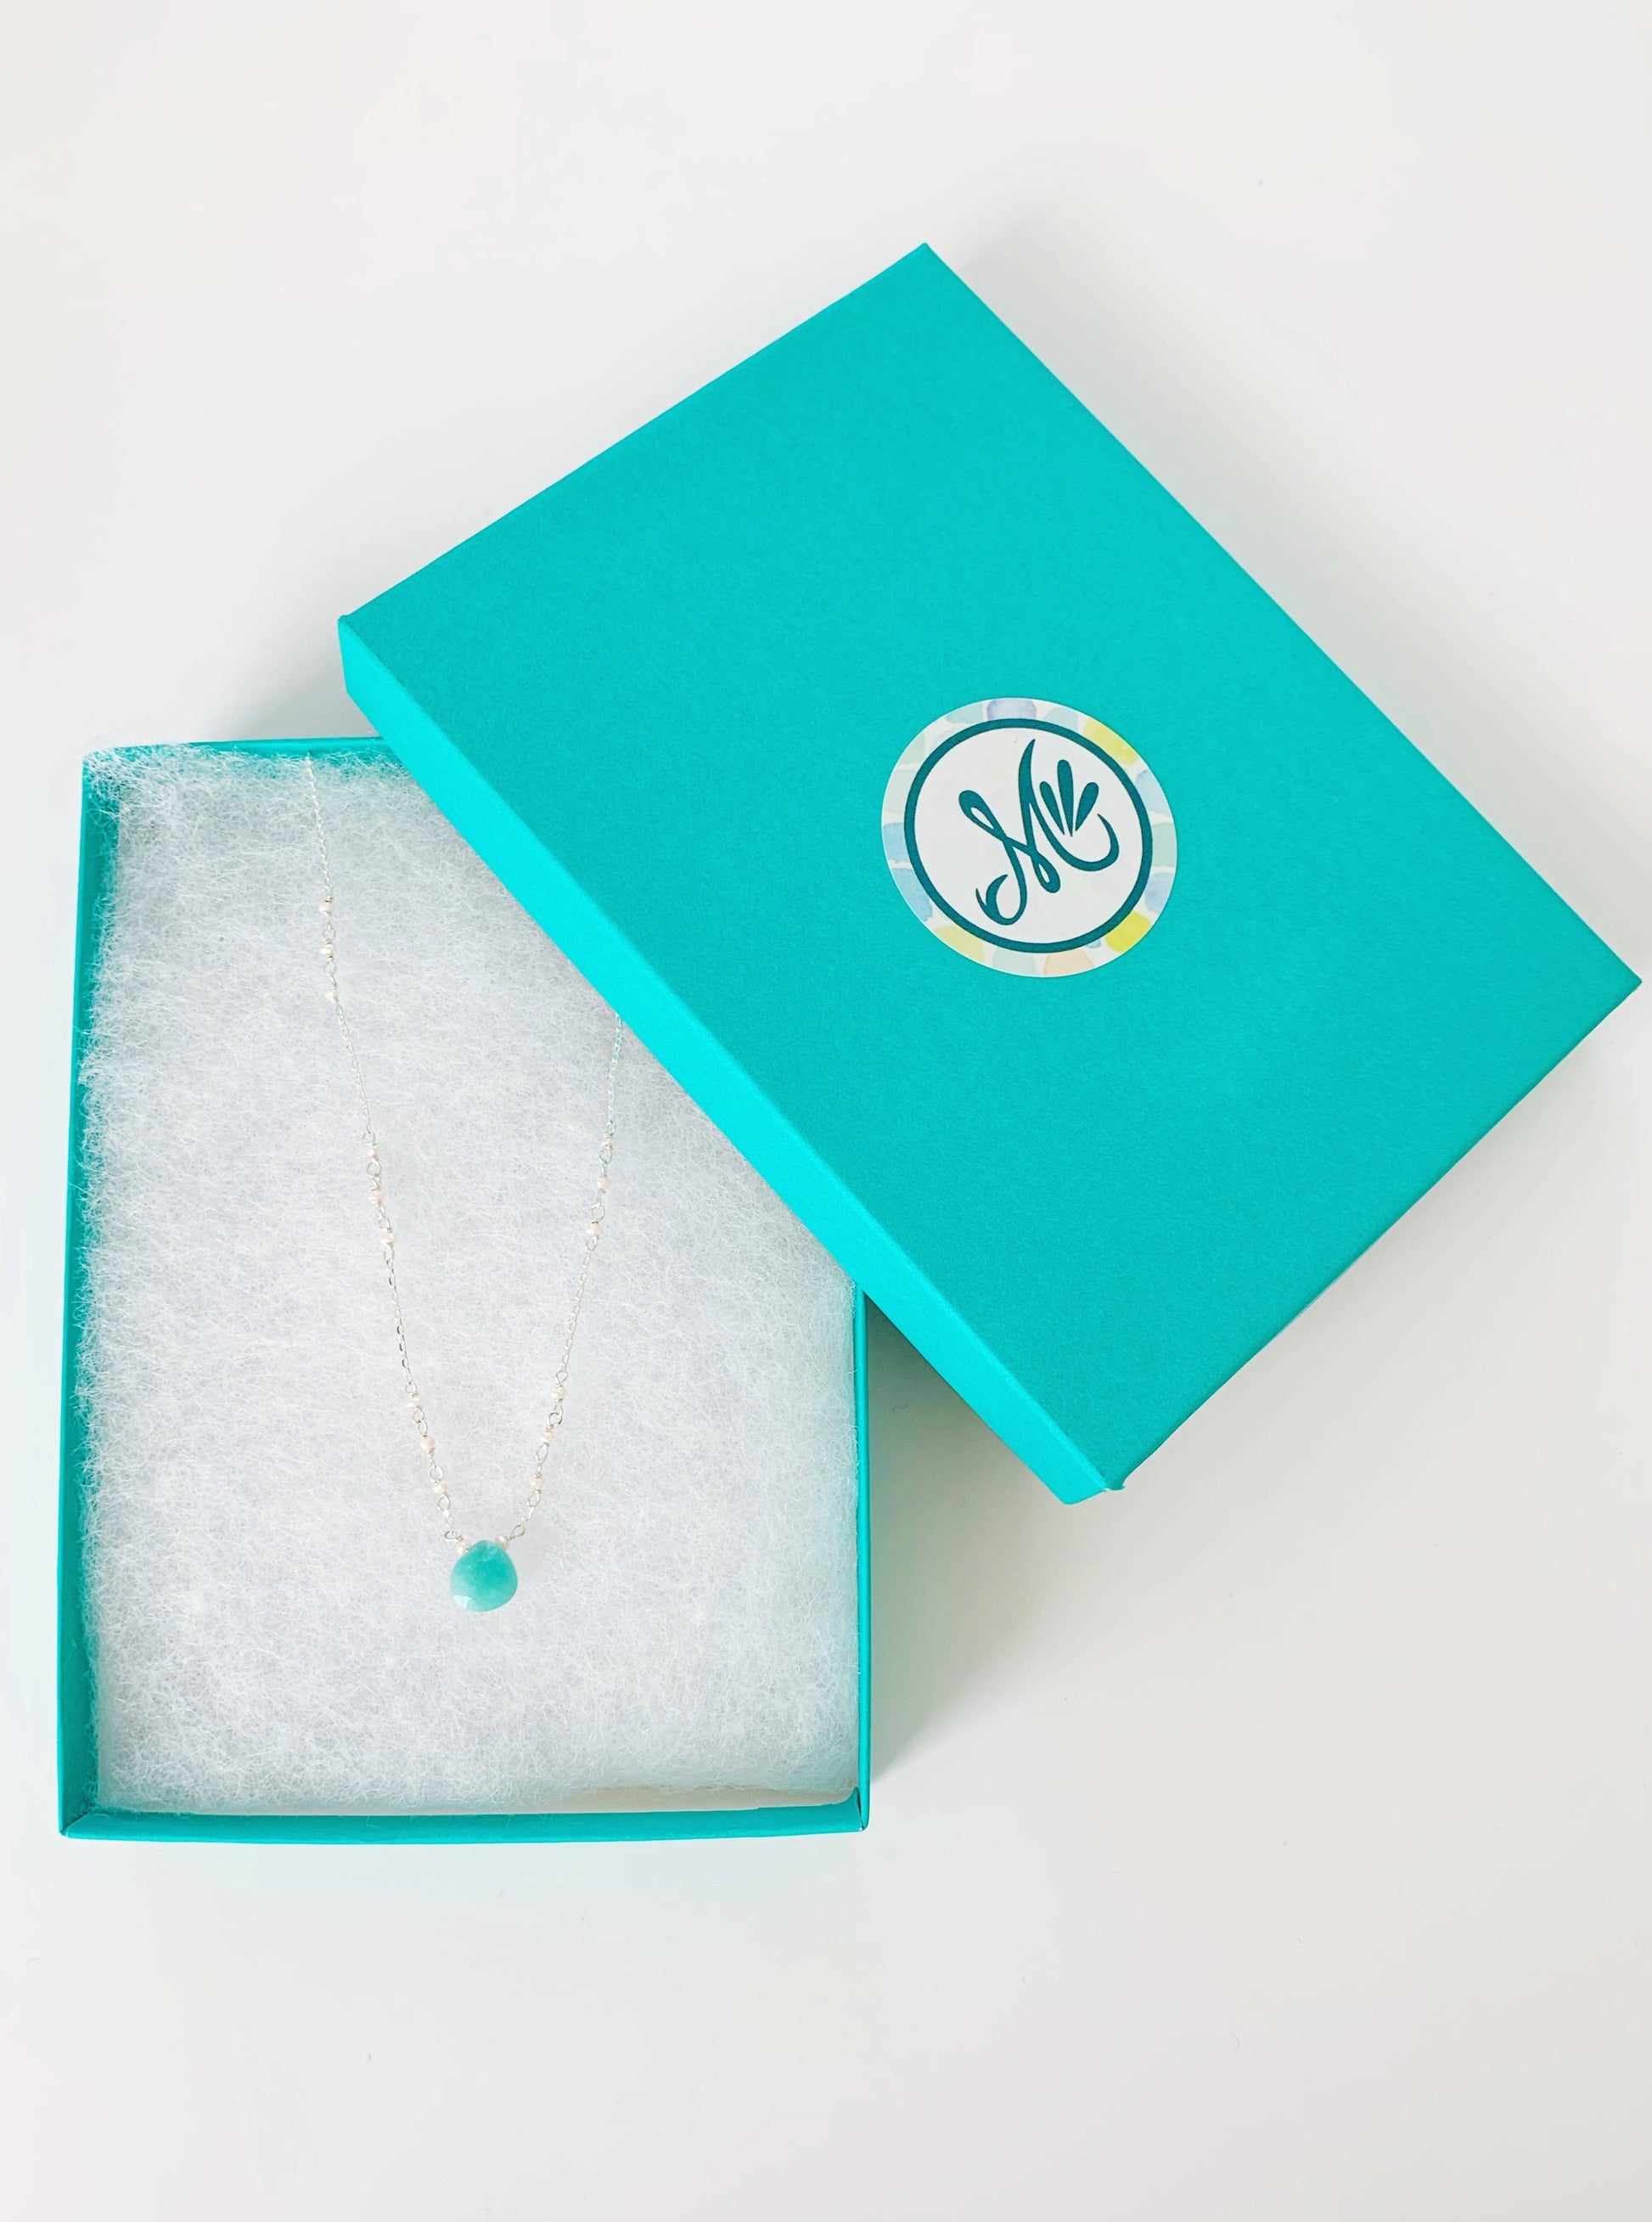 The island air necklace by mermaids and madeleines is pictured here in a cotton lined teal gift box. The necklace has an amazonite gem at the center and freshwater pearl in the sterling silver chain